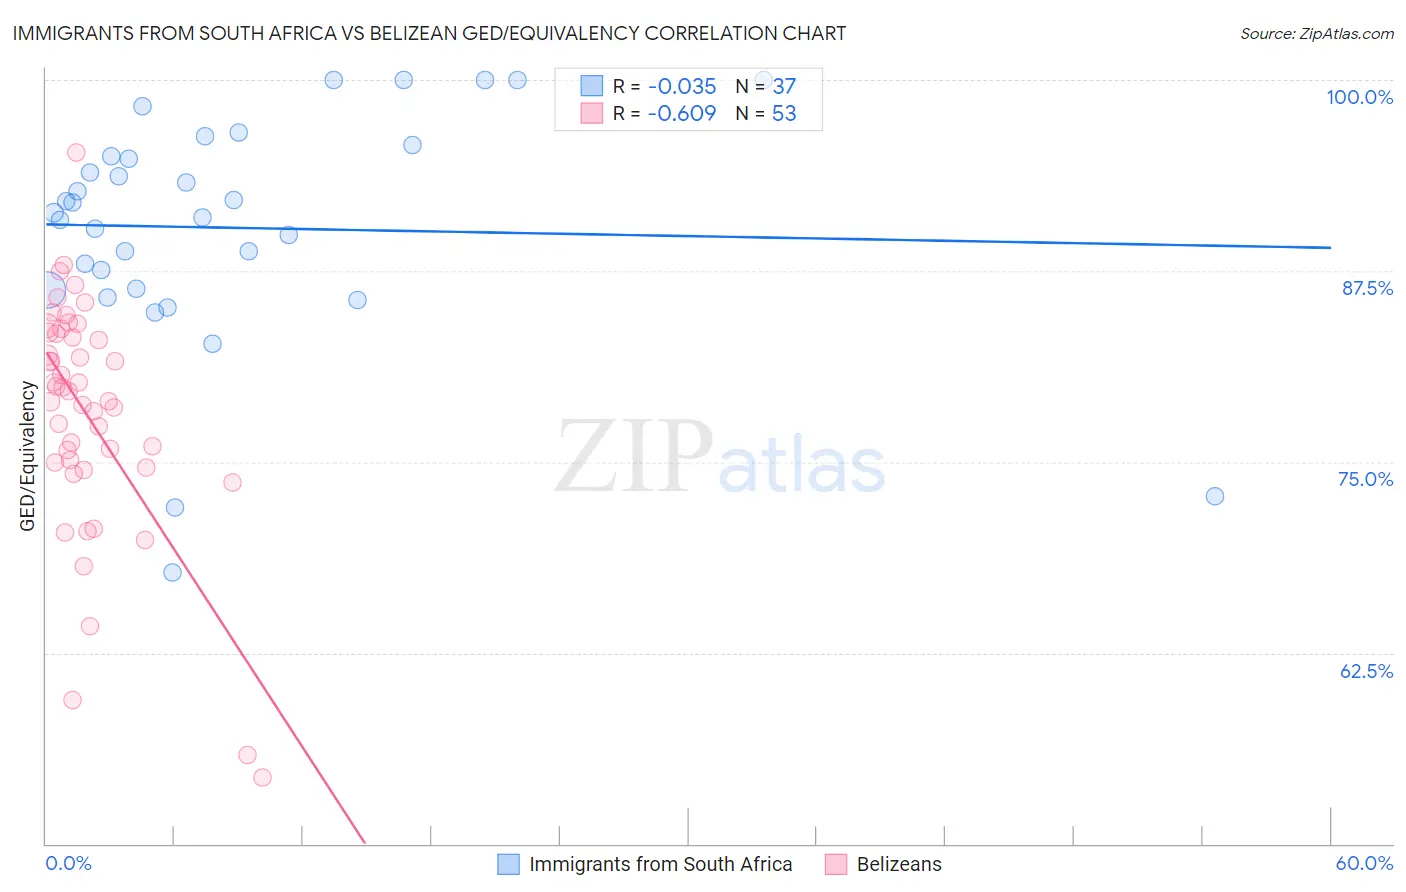 Immigrants from South Africa vs Belizean GED/Equivalency